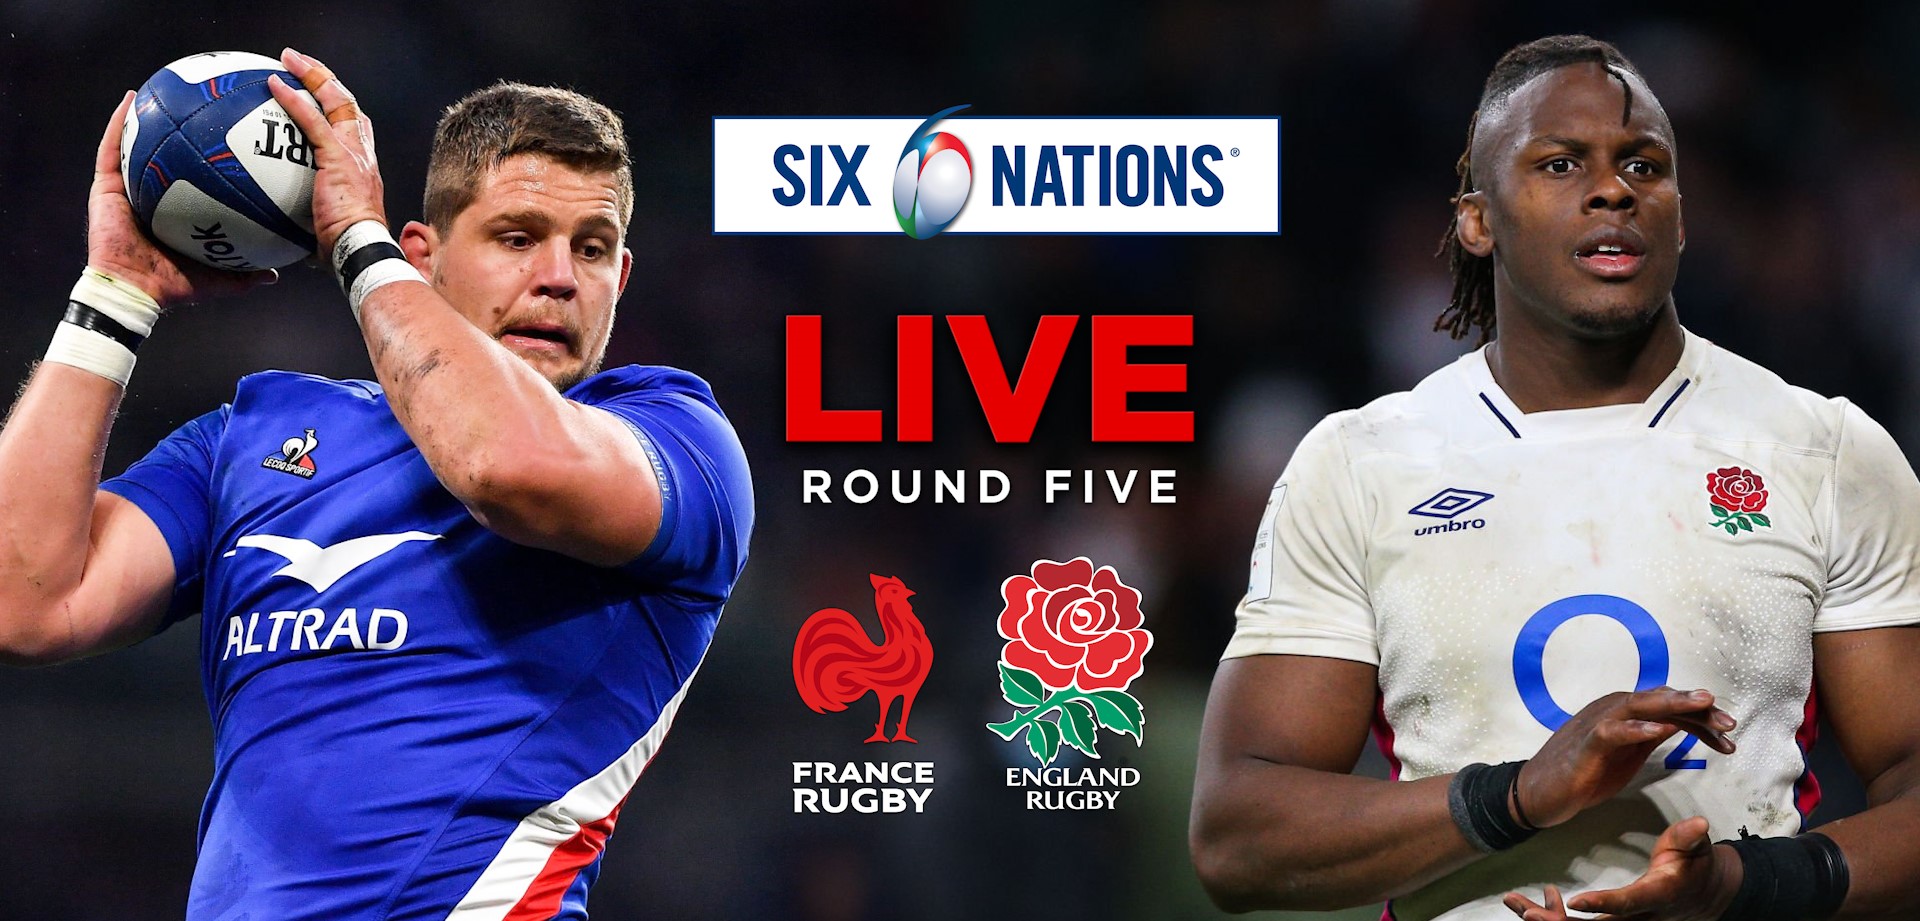 France vs England LIVE Six Nations Willemse Itoje